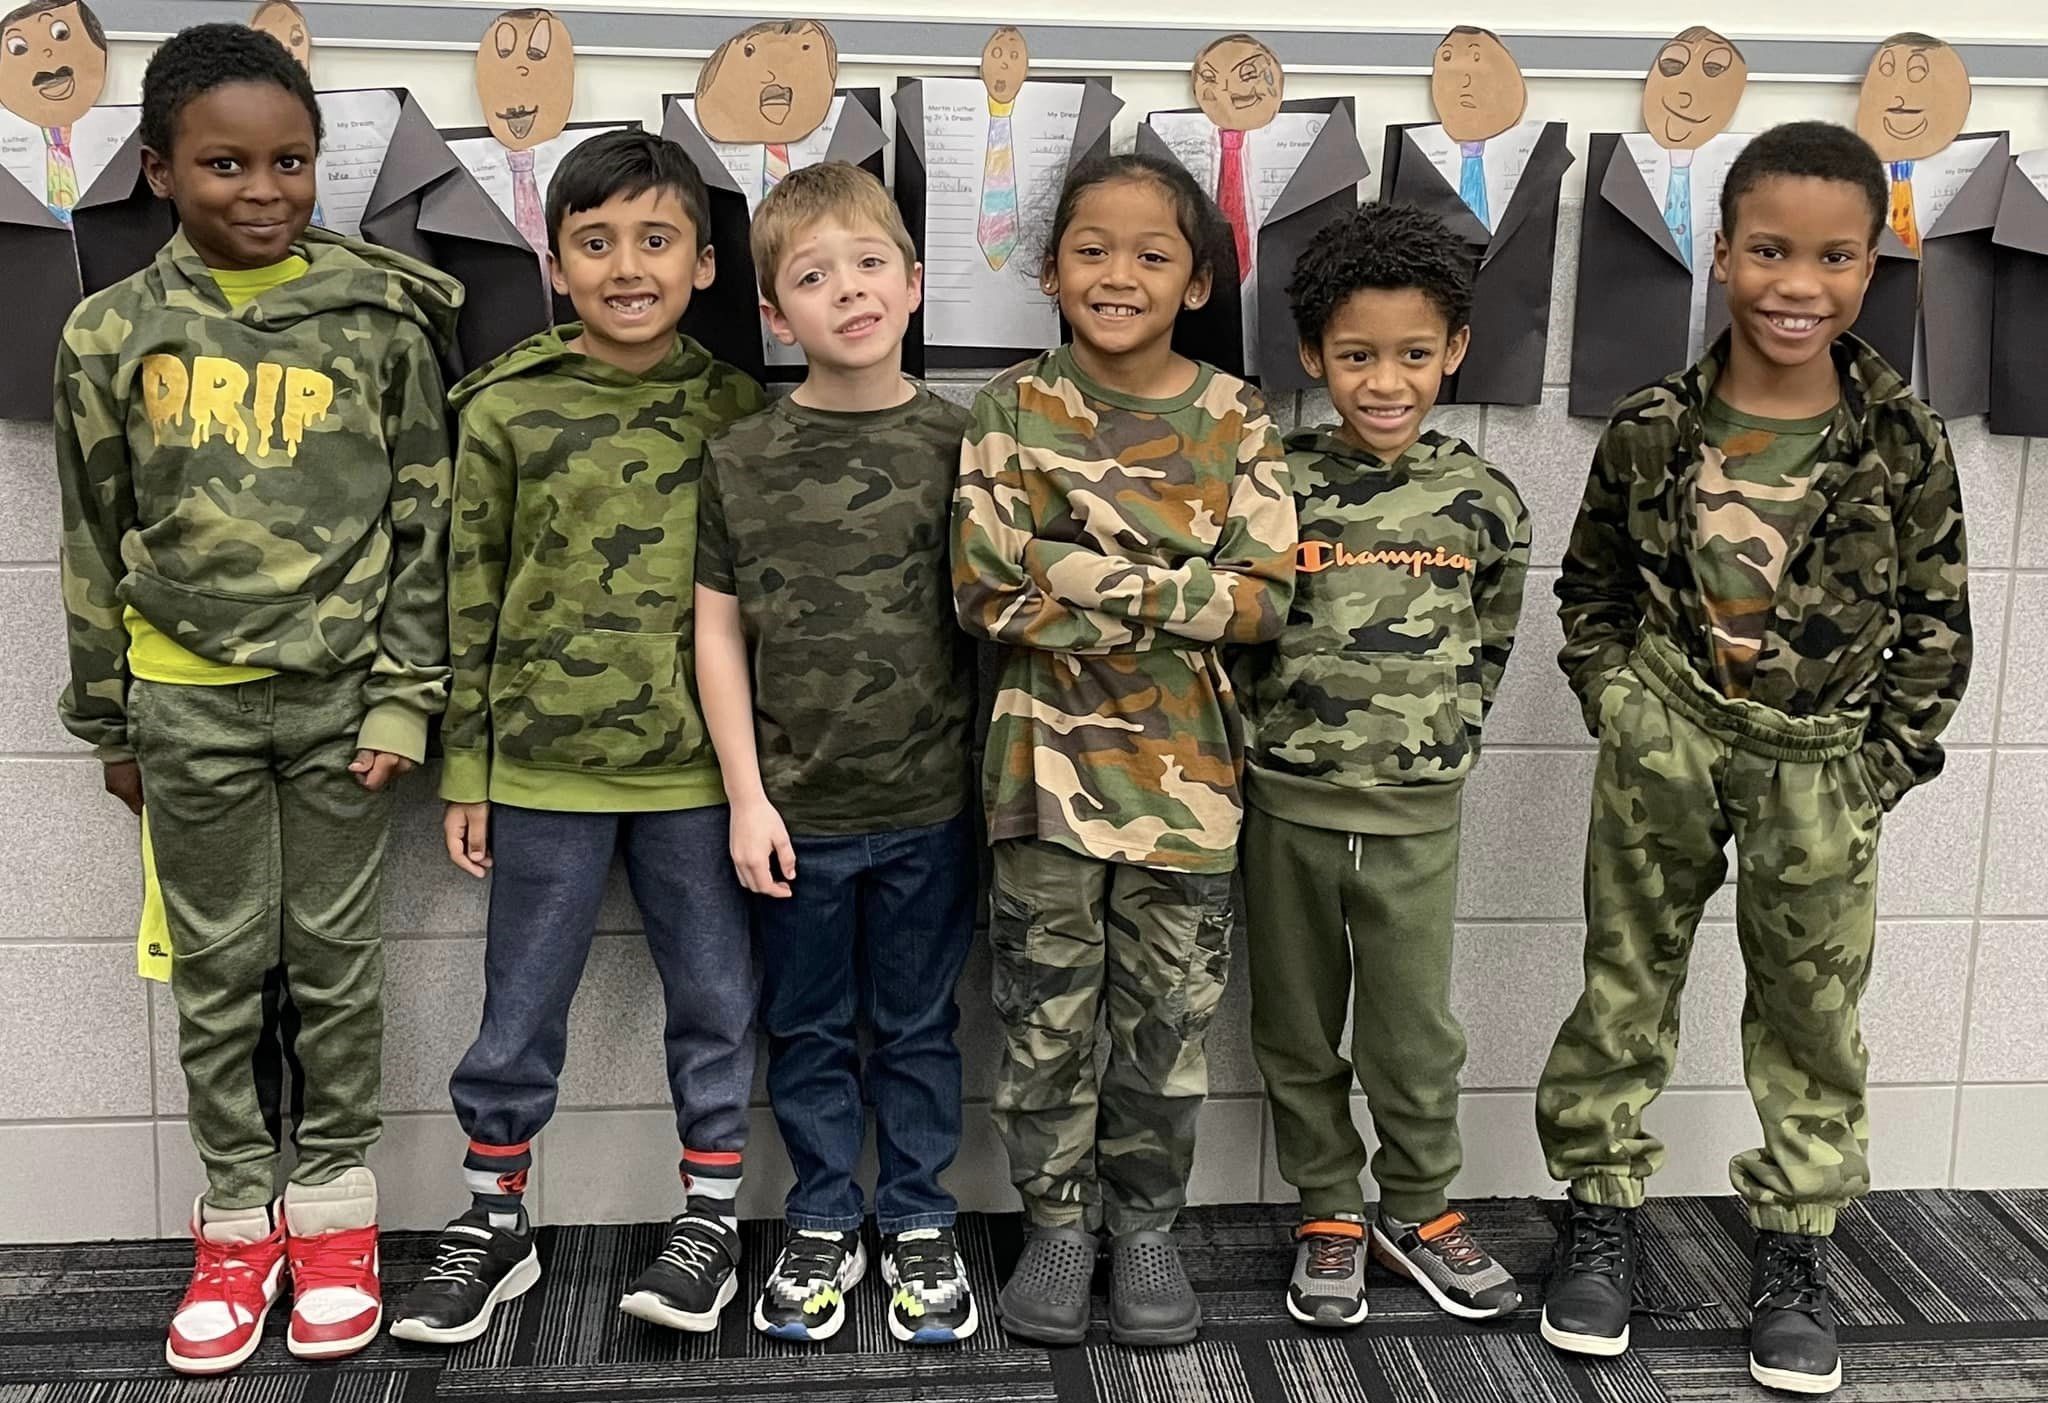 Tussing Elementary students wearing camo